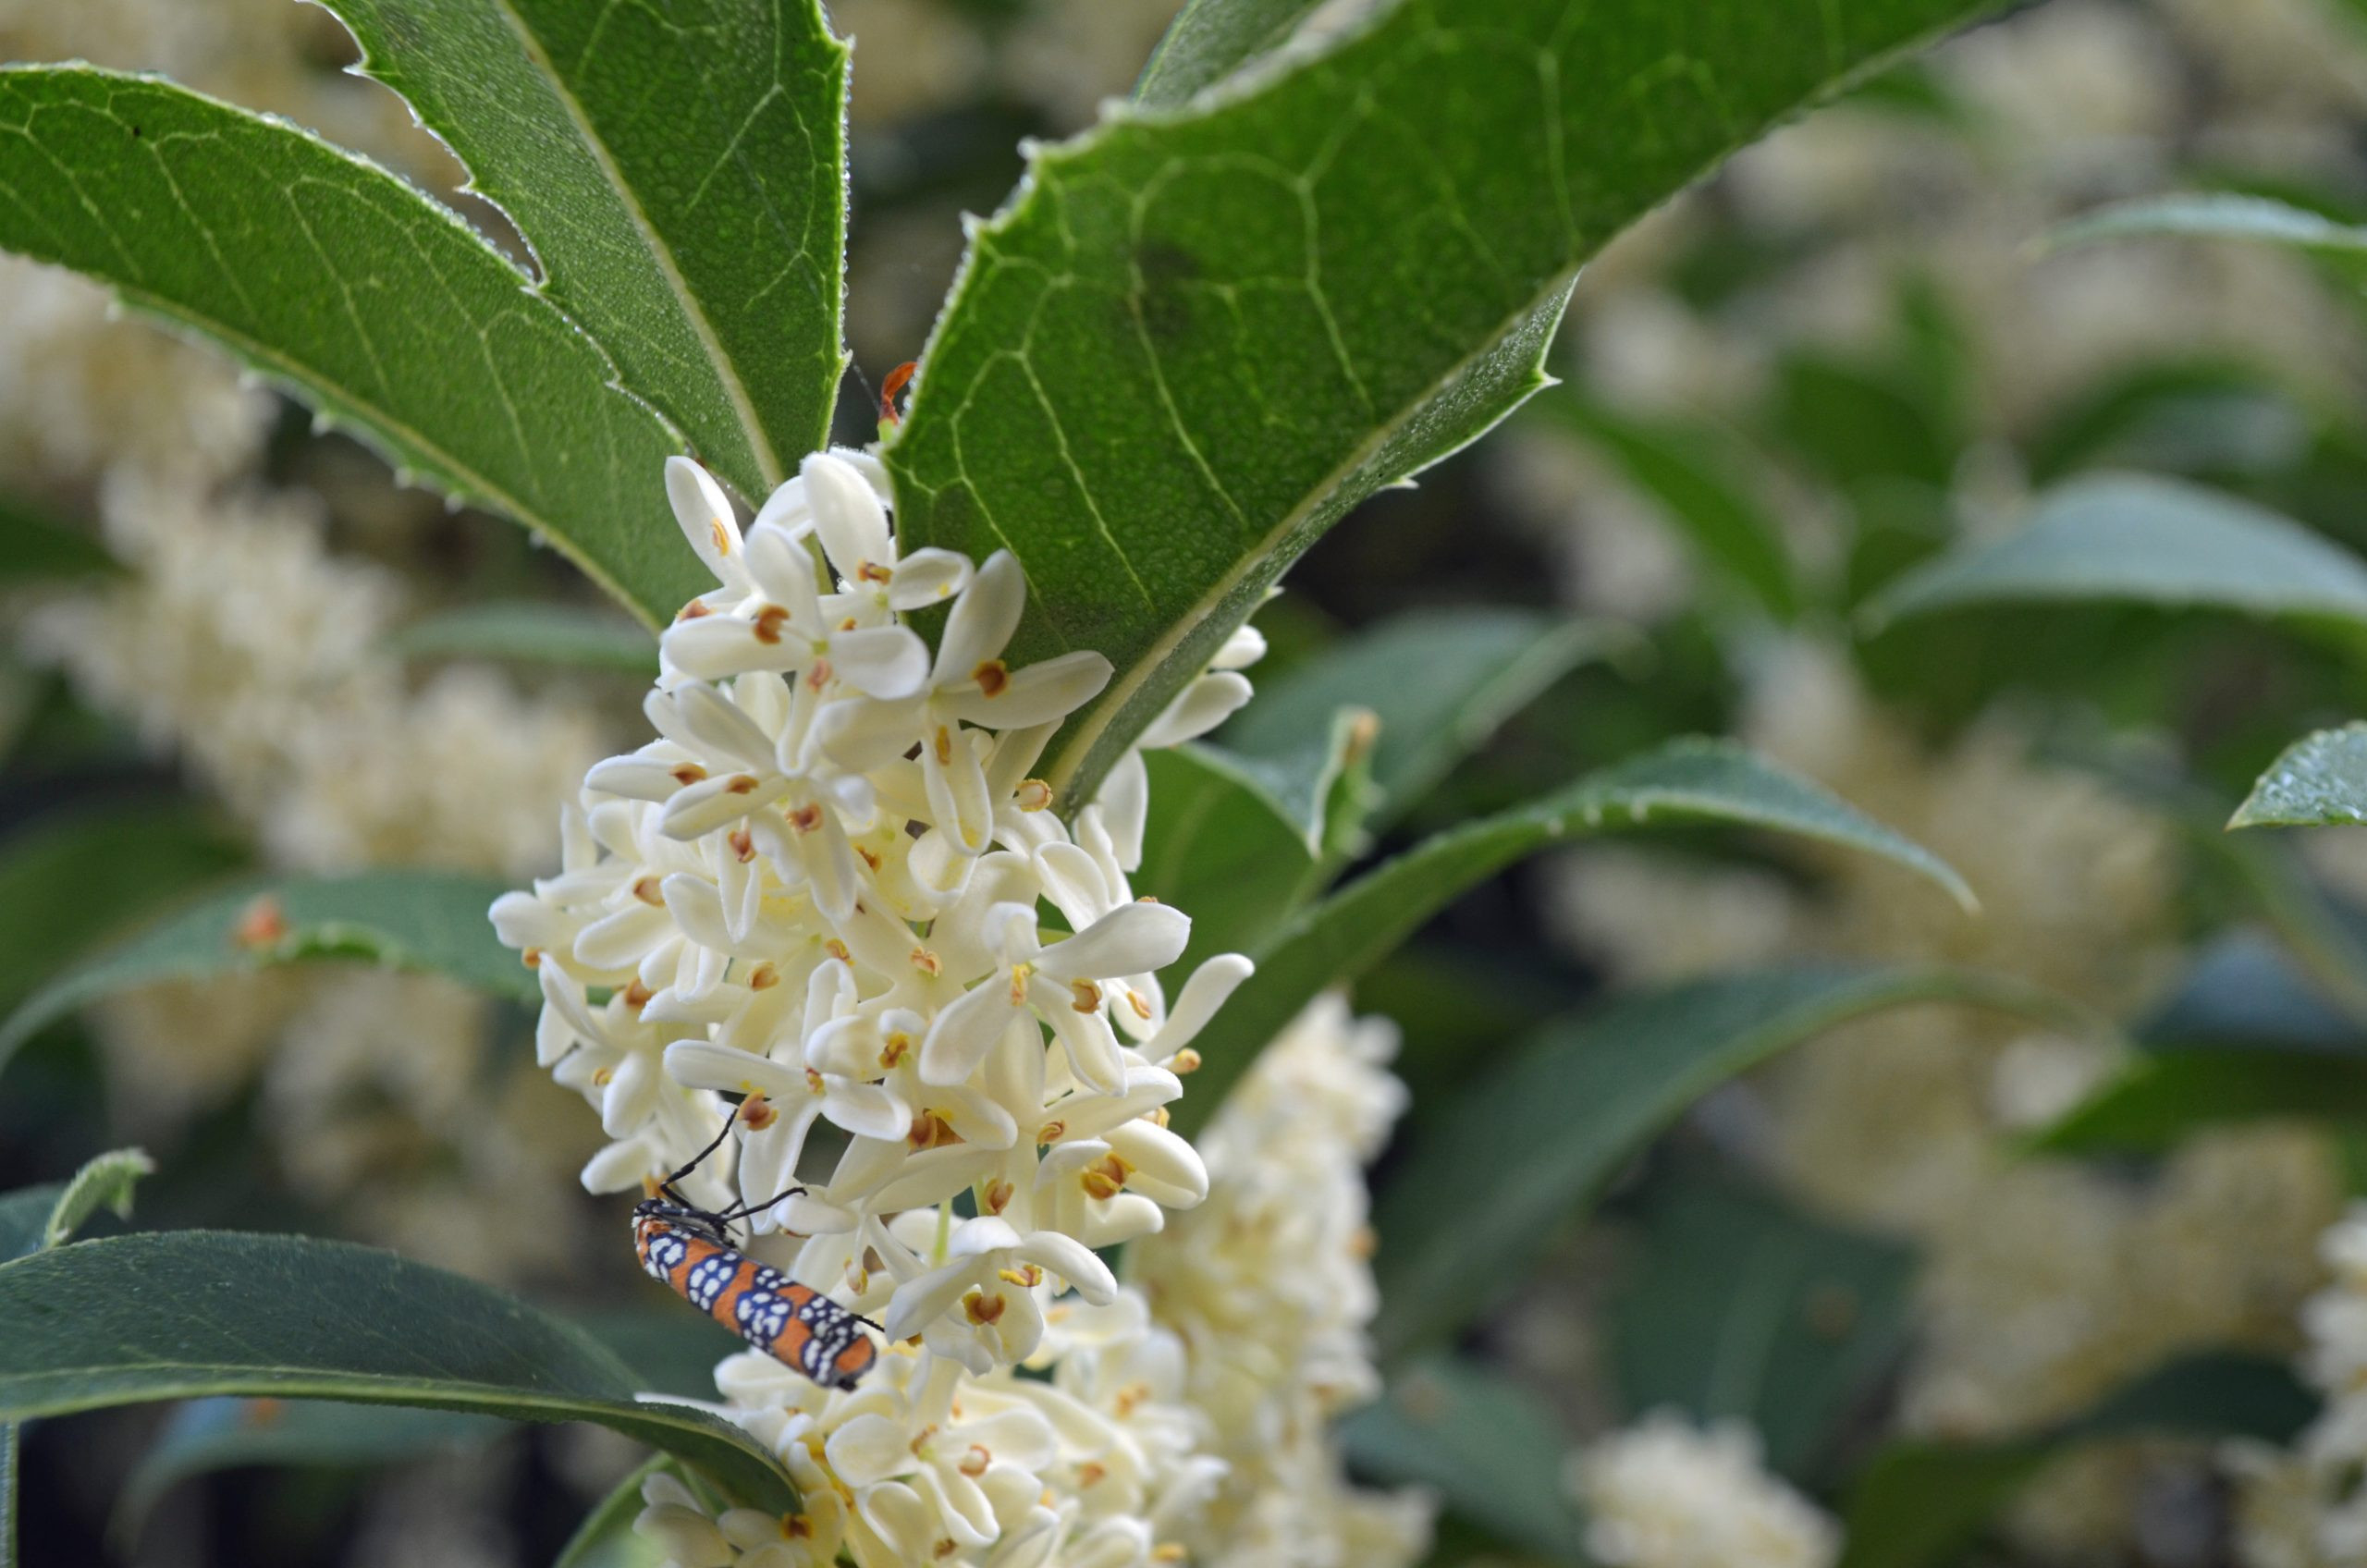 Osmanthus: Planting For Frangrance — From Lewis Ginter Botanical